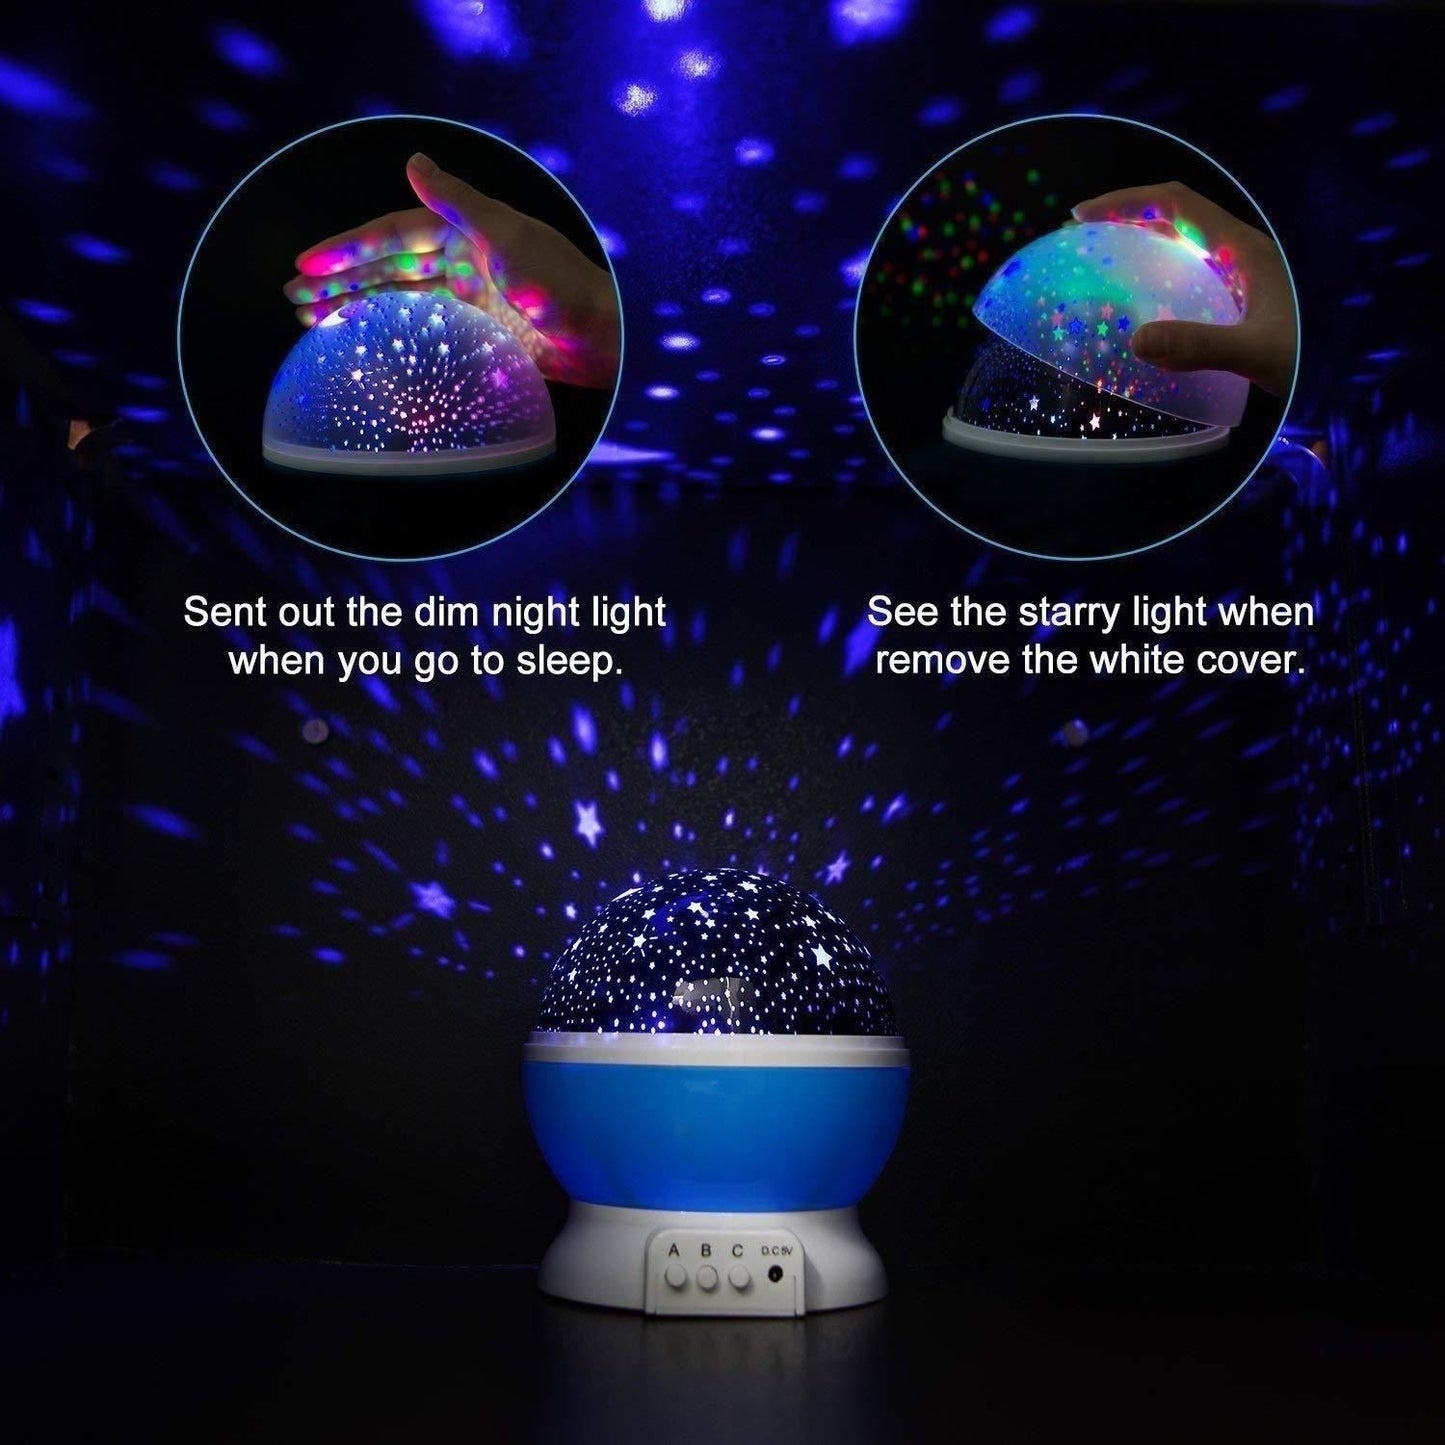 Star Master Rotating 360 Degree Moon Night Light Lamp Projector with Colors and USB Cable,Lamp for Kids Room Night Bulb (Multi Color,Pack of 1) (Random)